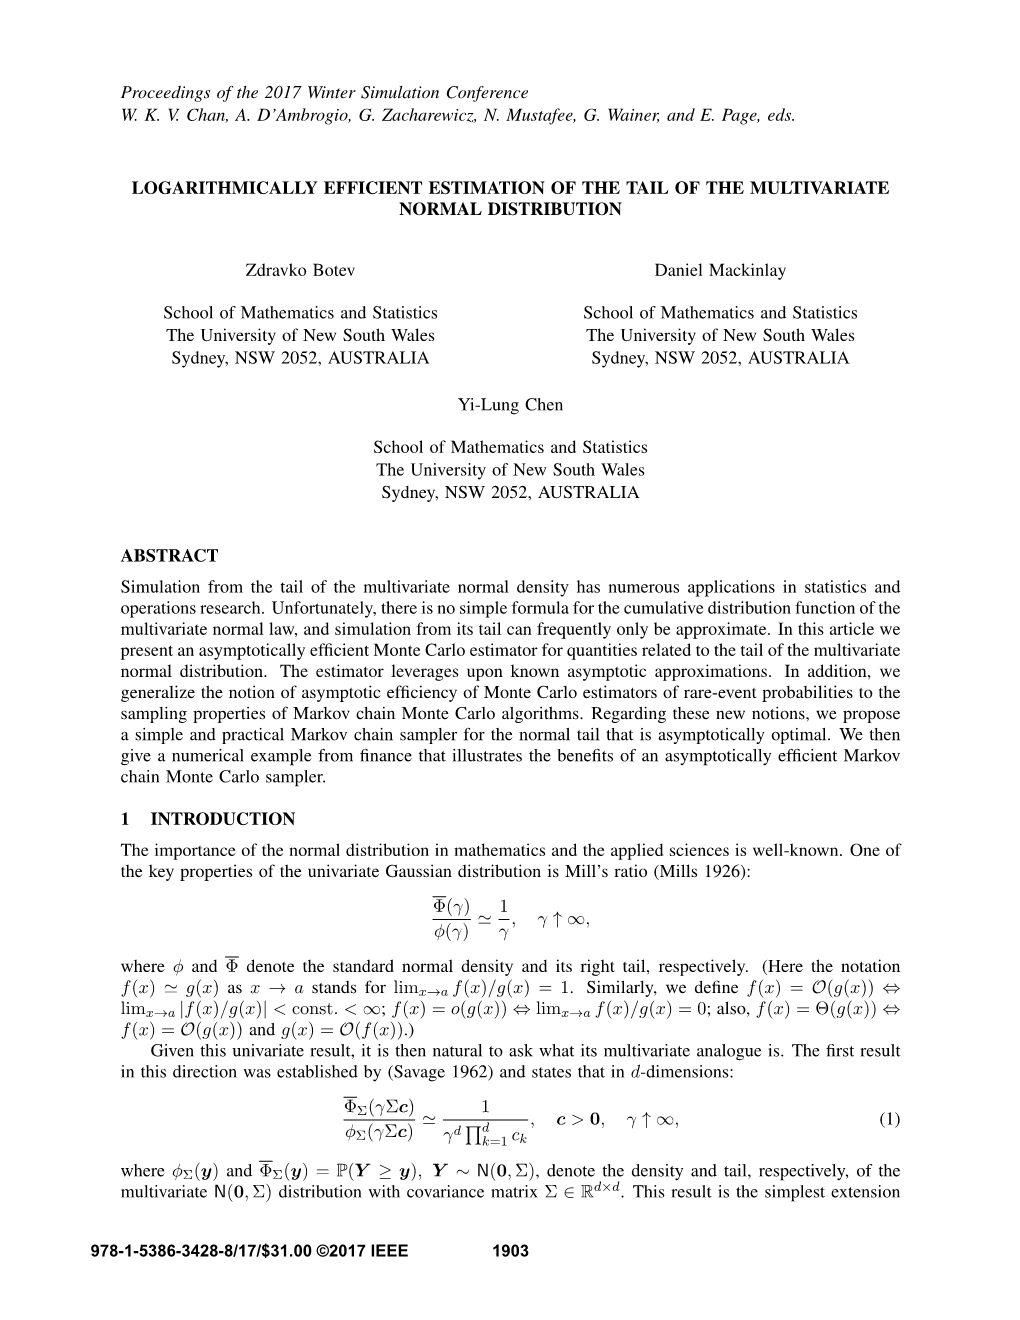 Logarithmically Efficient Estimation of the Tail of the Multivariate Normal Distribution